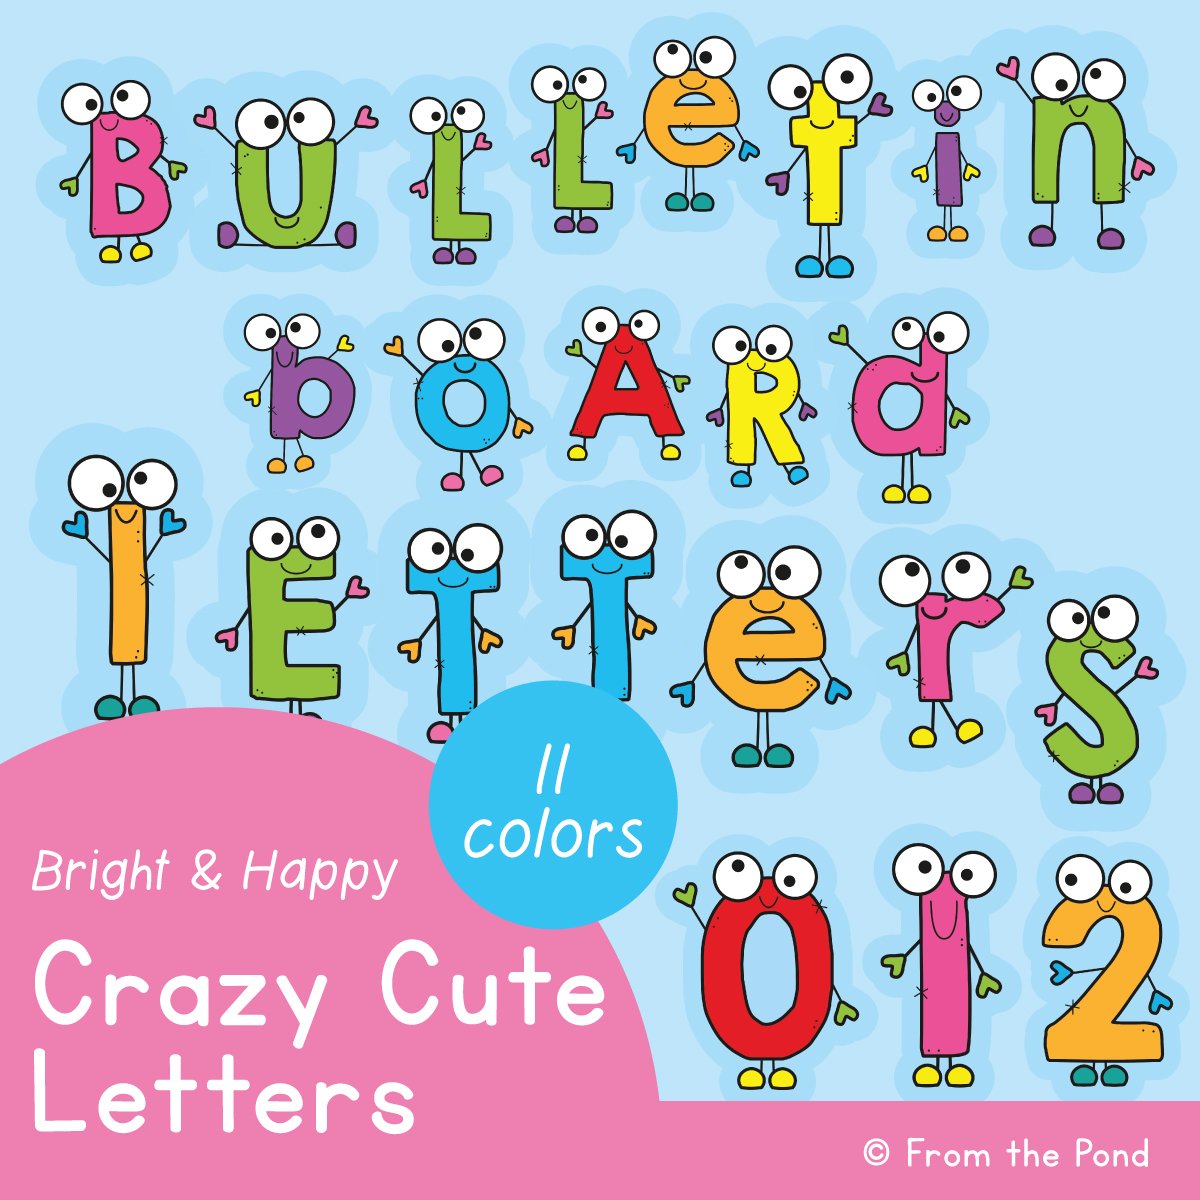 English for Kids Step by Step: Bulletin Board Letters and Numbers